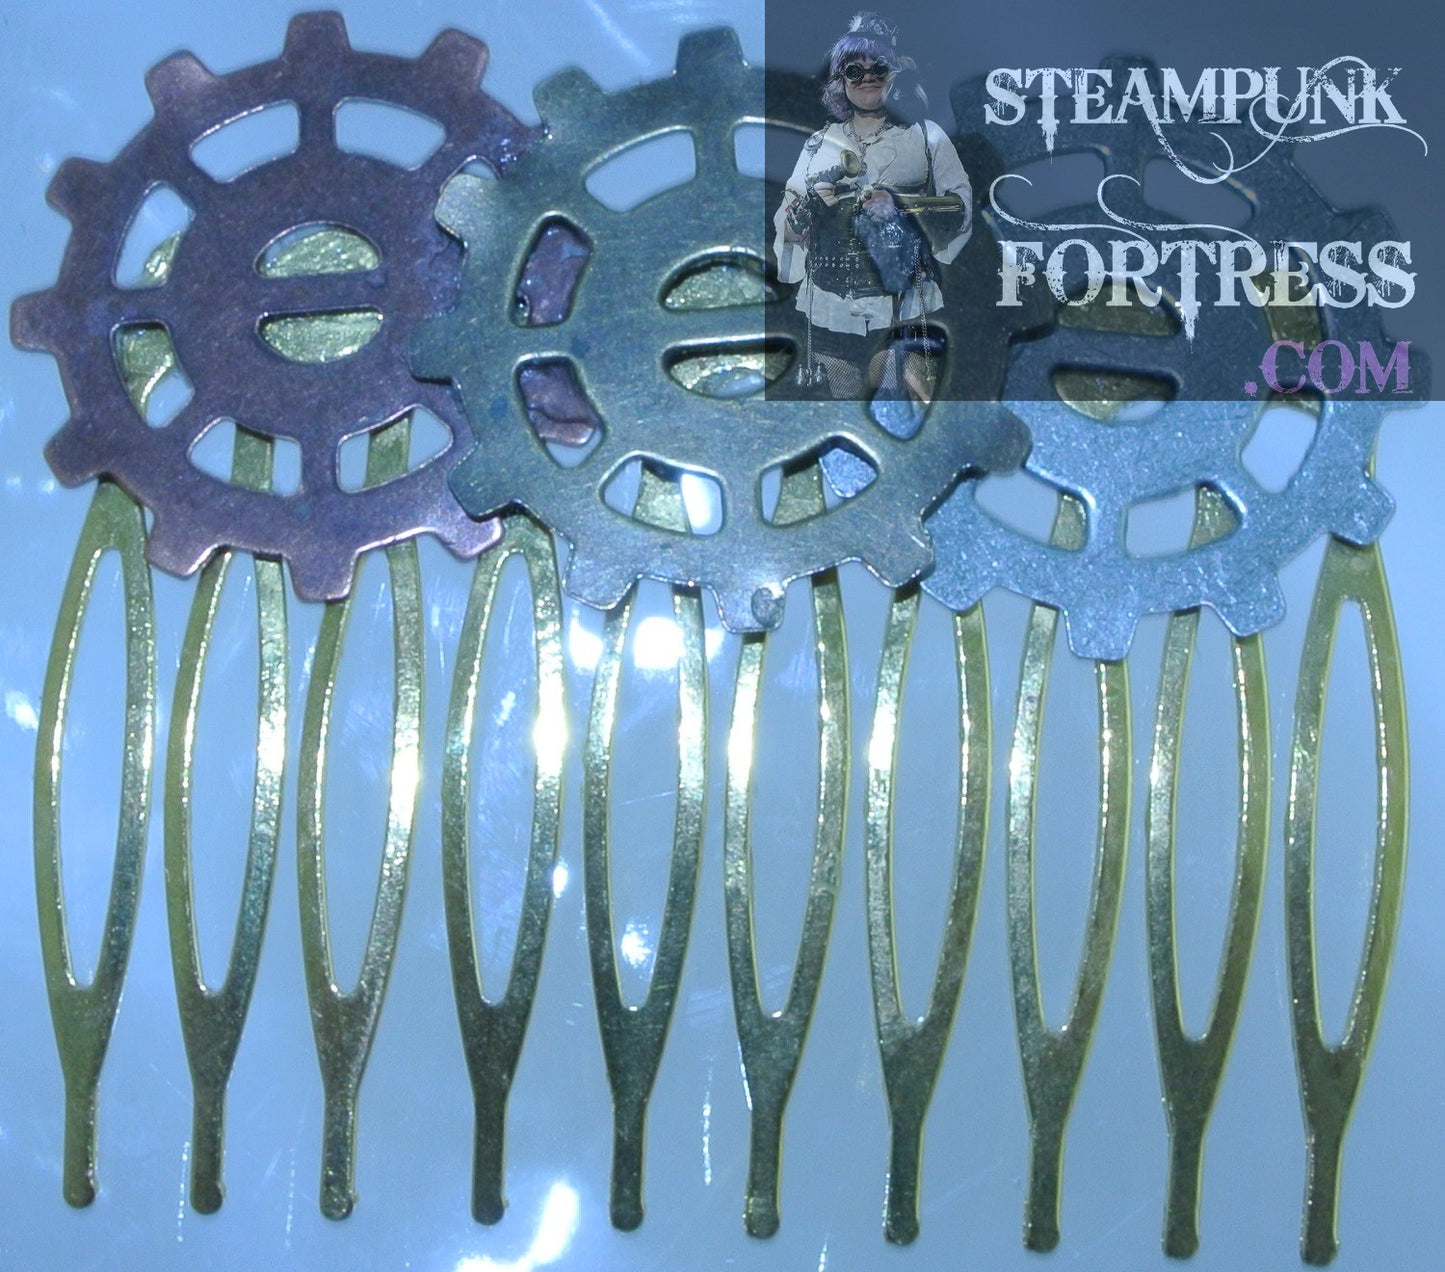 HAIR COMB GOLD GEARS 3 SPOKE WATCH CLOCK SET AVAILABLE STARR WILDE STEAMPUNK FORTRESS